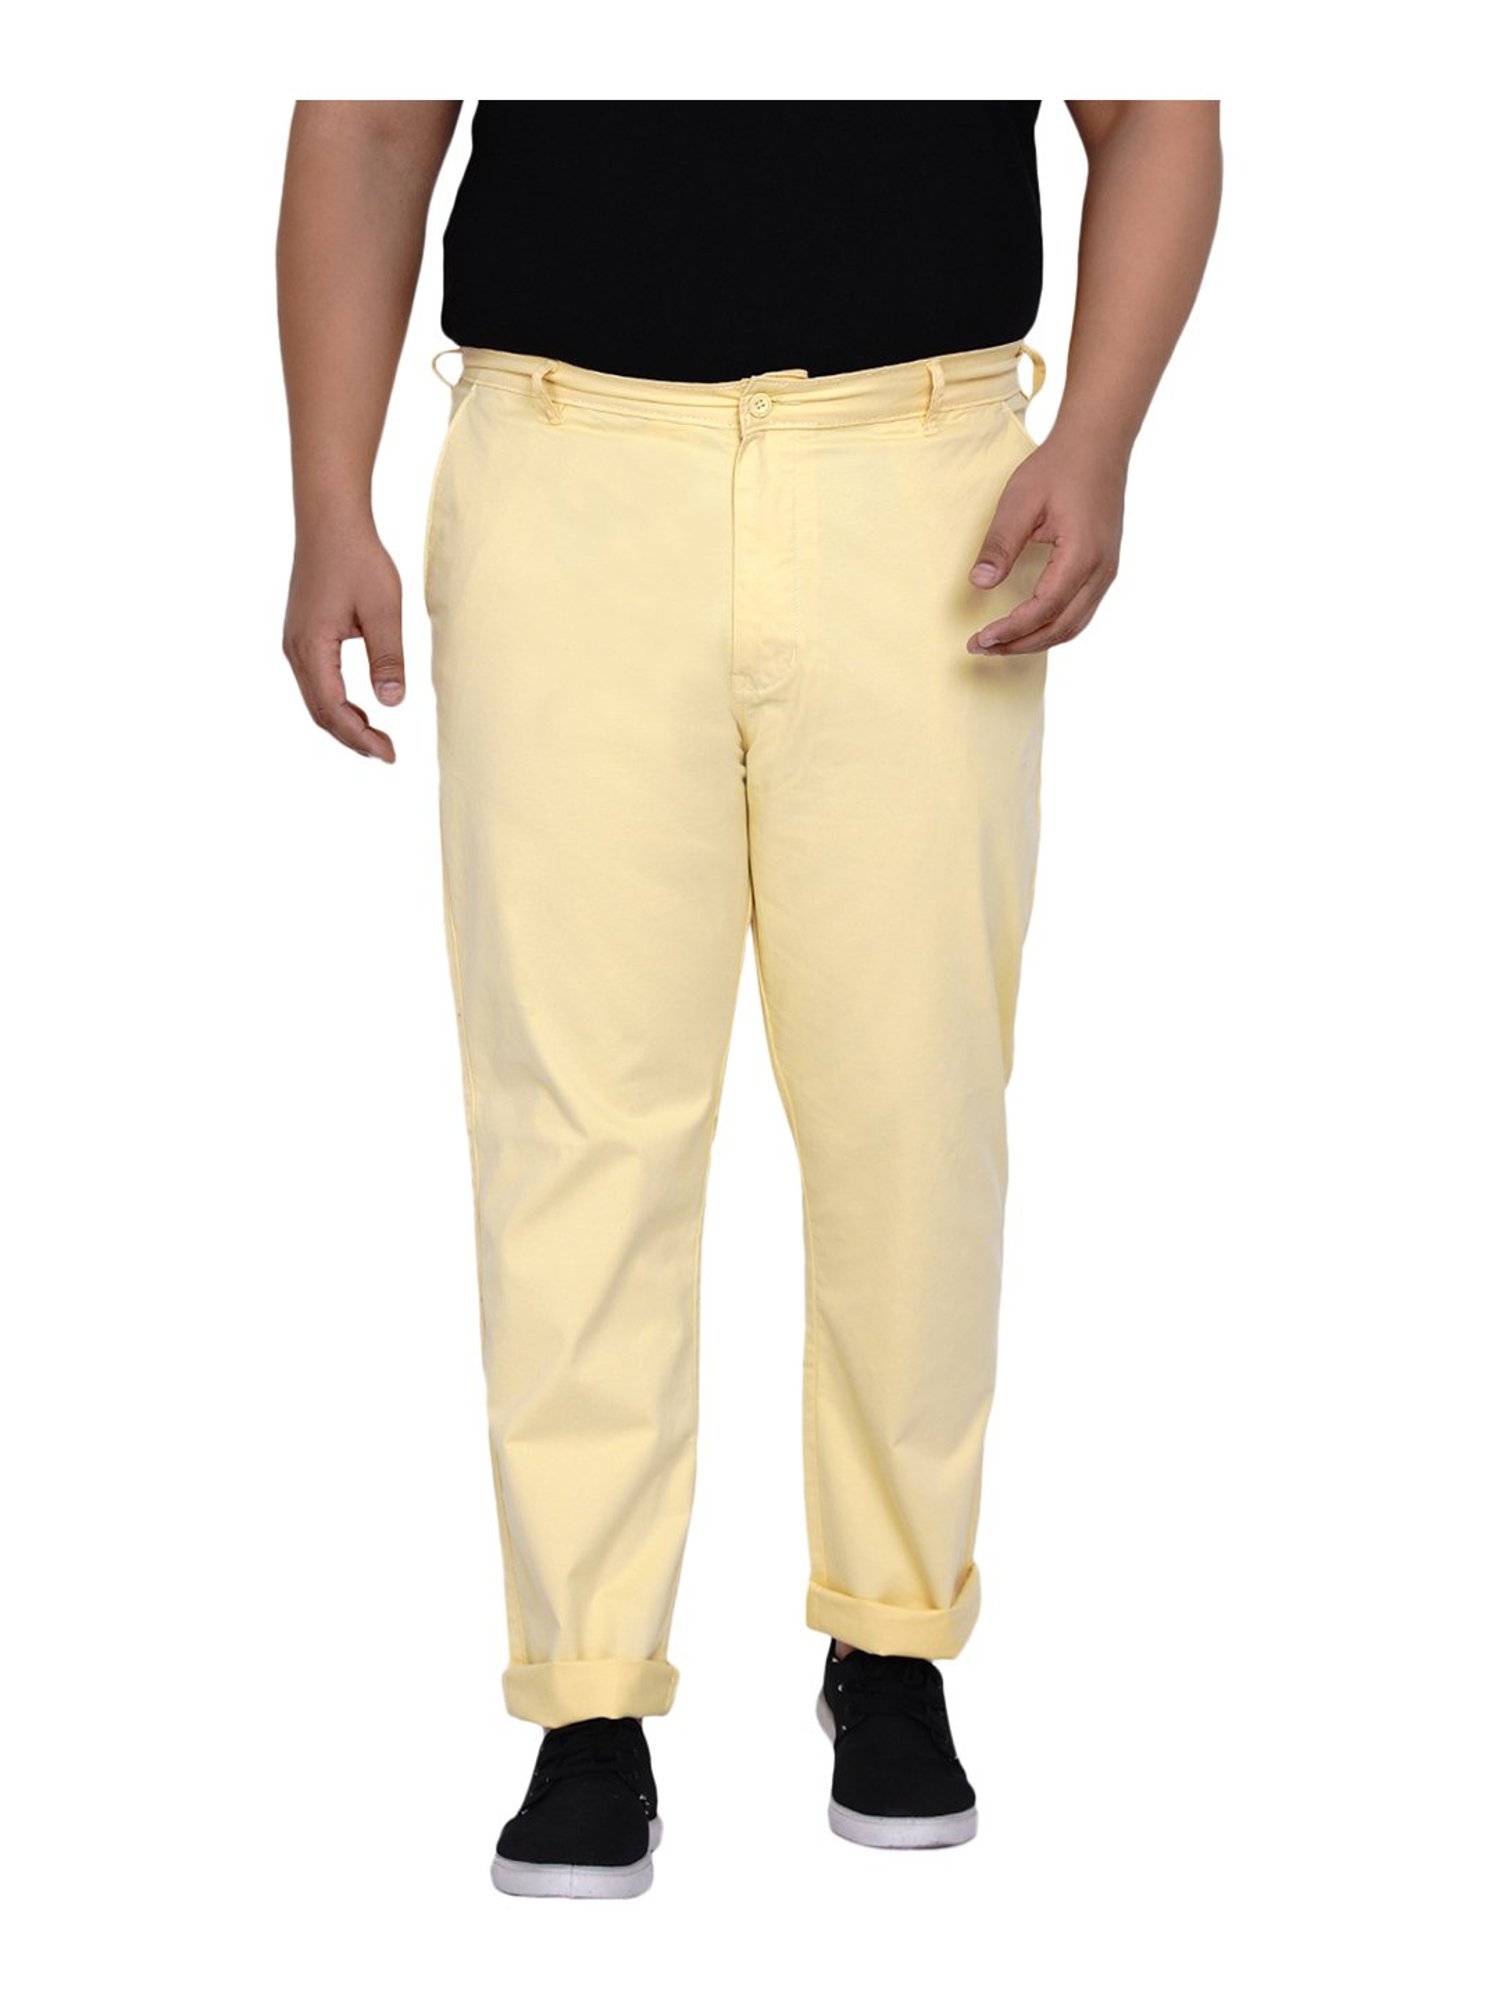 Mens Yellow Pants Outfits35 Best Ways to Wear Yellow Pants  Mens yellow  pants Yellow jeans outfit Yellow pants